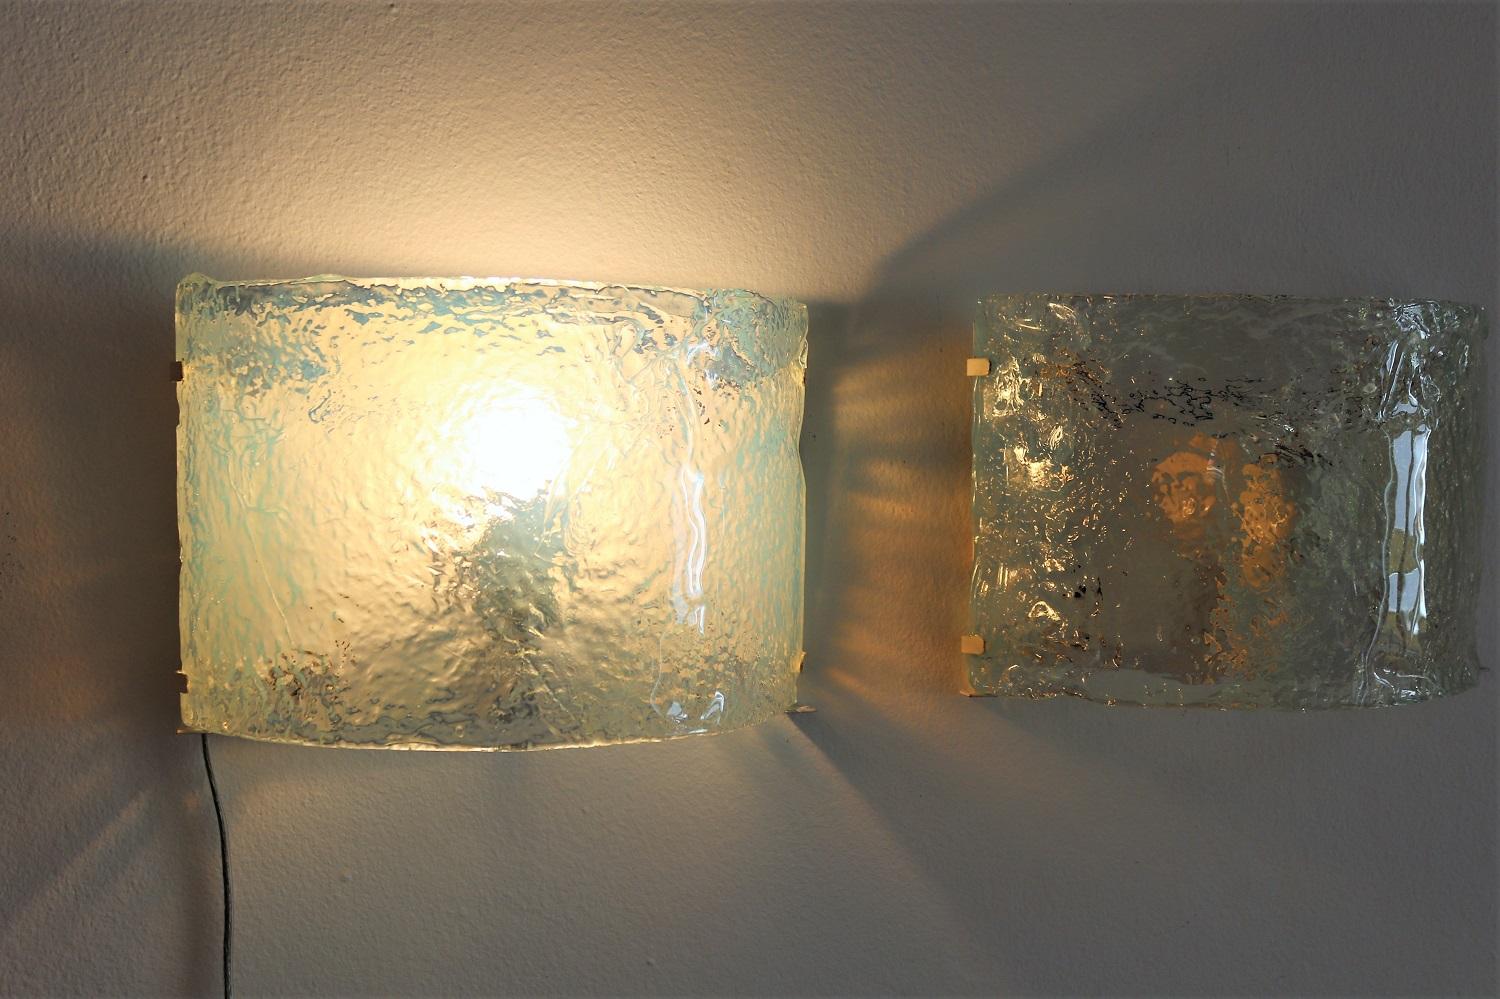 Metal Italian Midcentury Wall Sconces in Opaline Murano Glass by Carlo Nason, 1970s For Sale